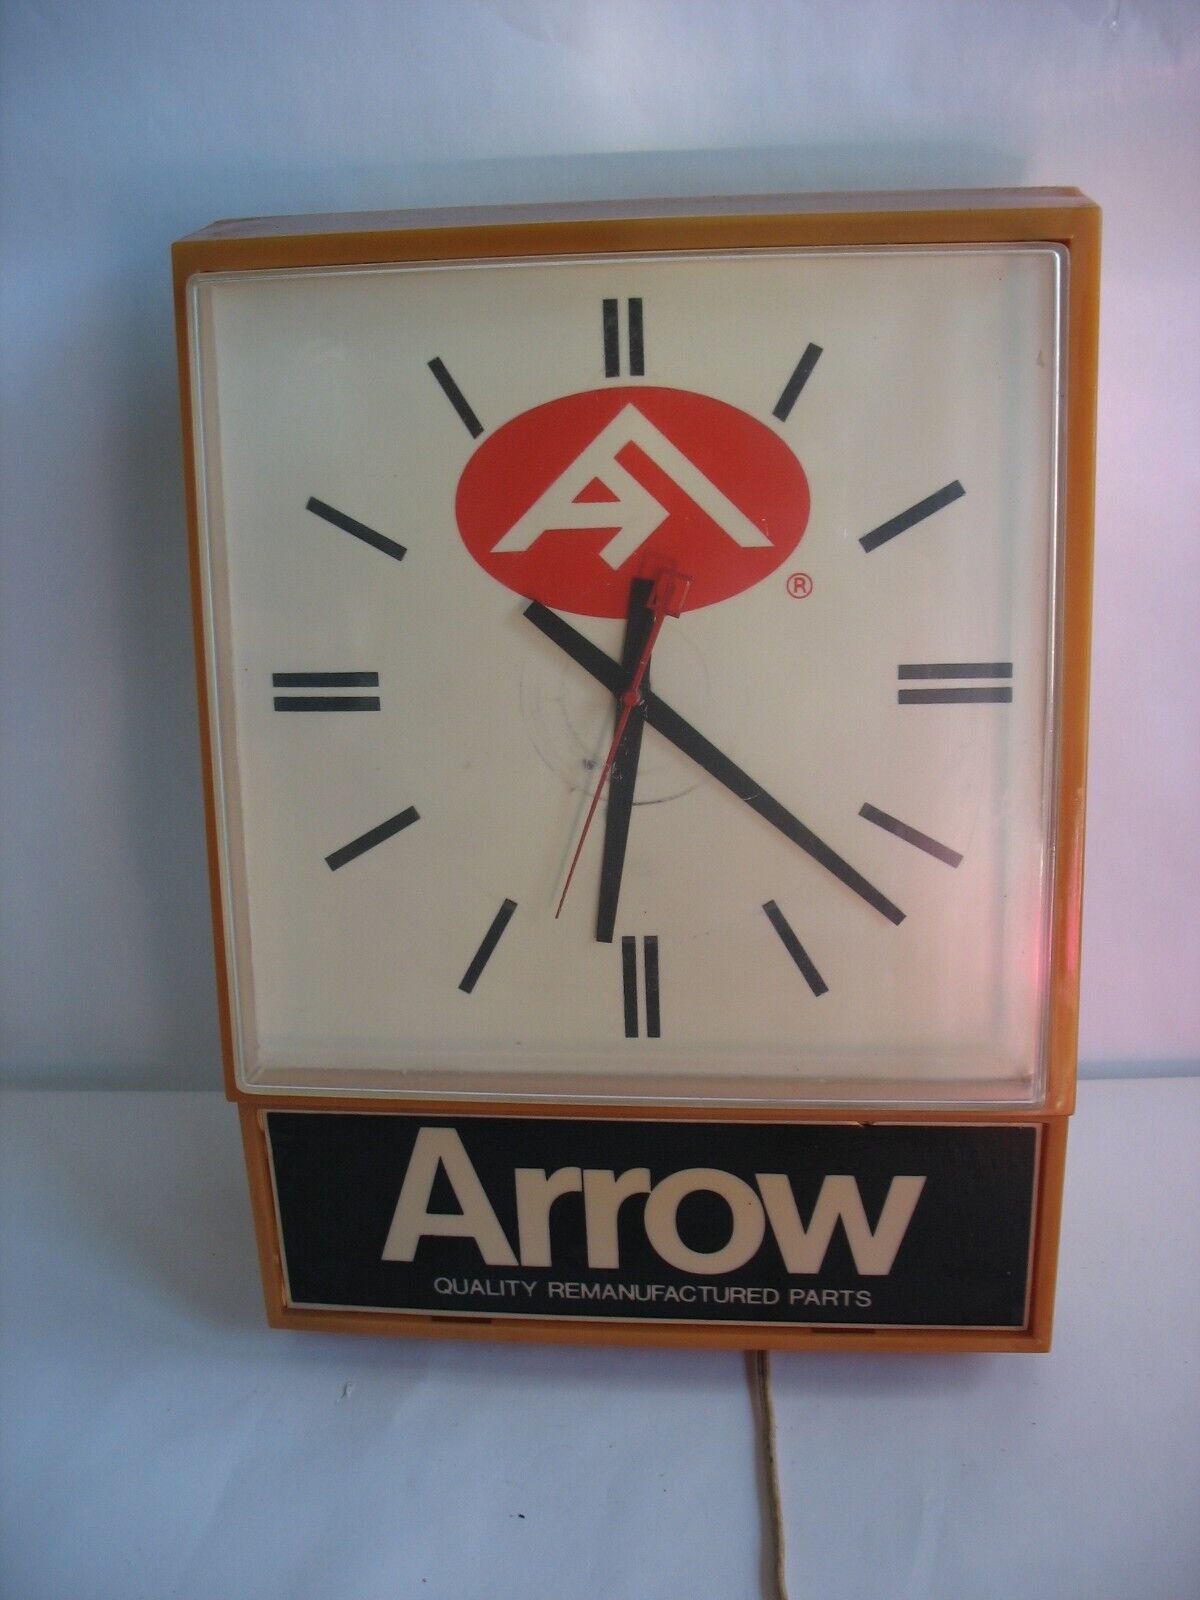 Arrow Quality Remanufactured Parts electric clock advertising Vtg Auto Man cave